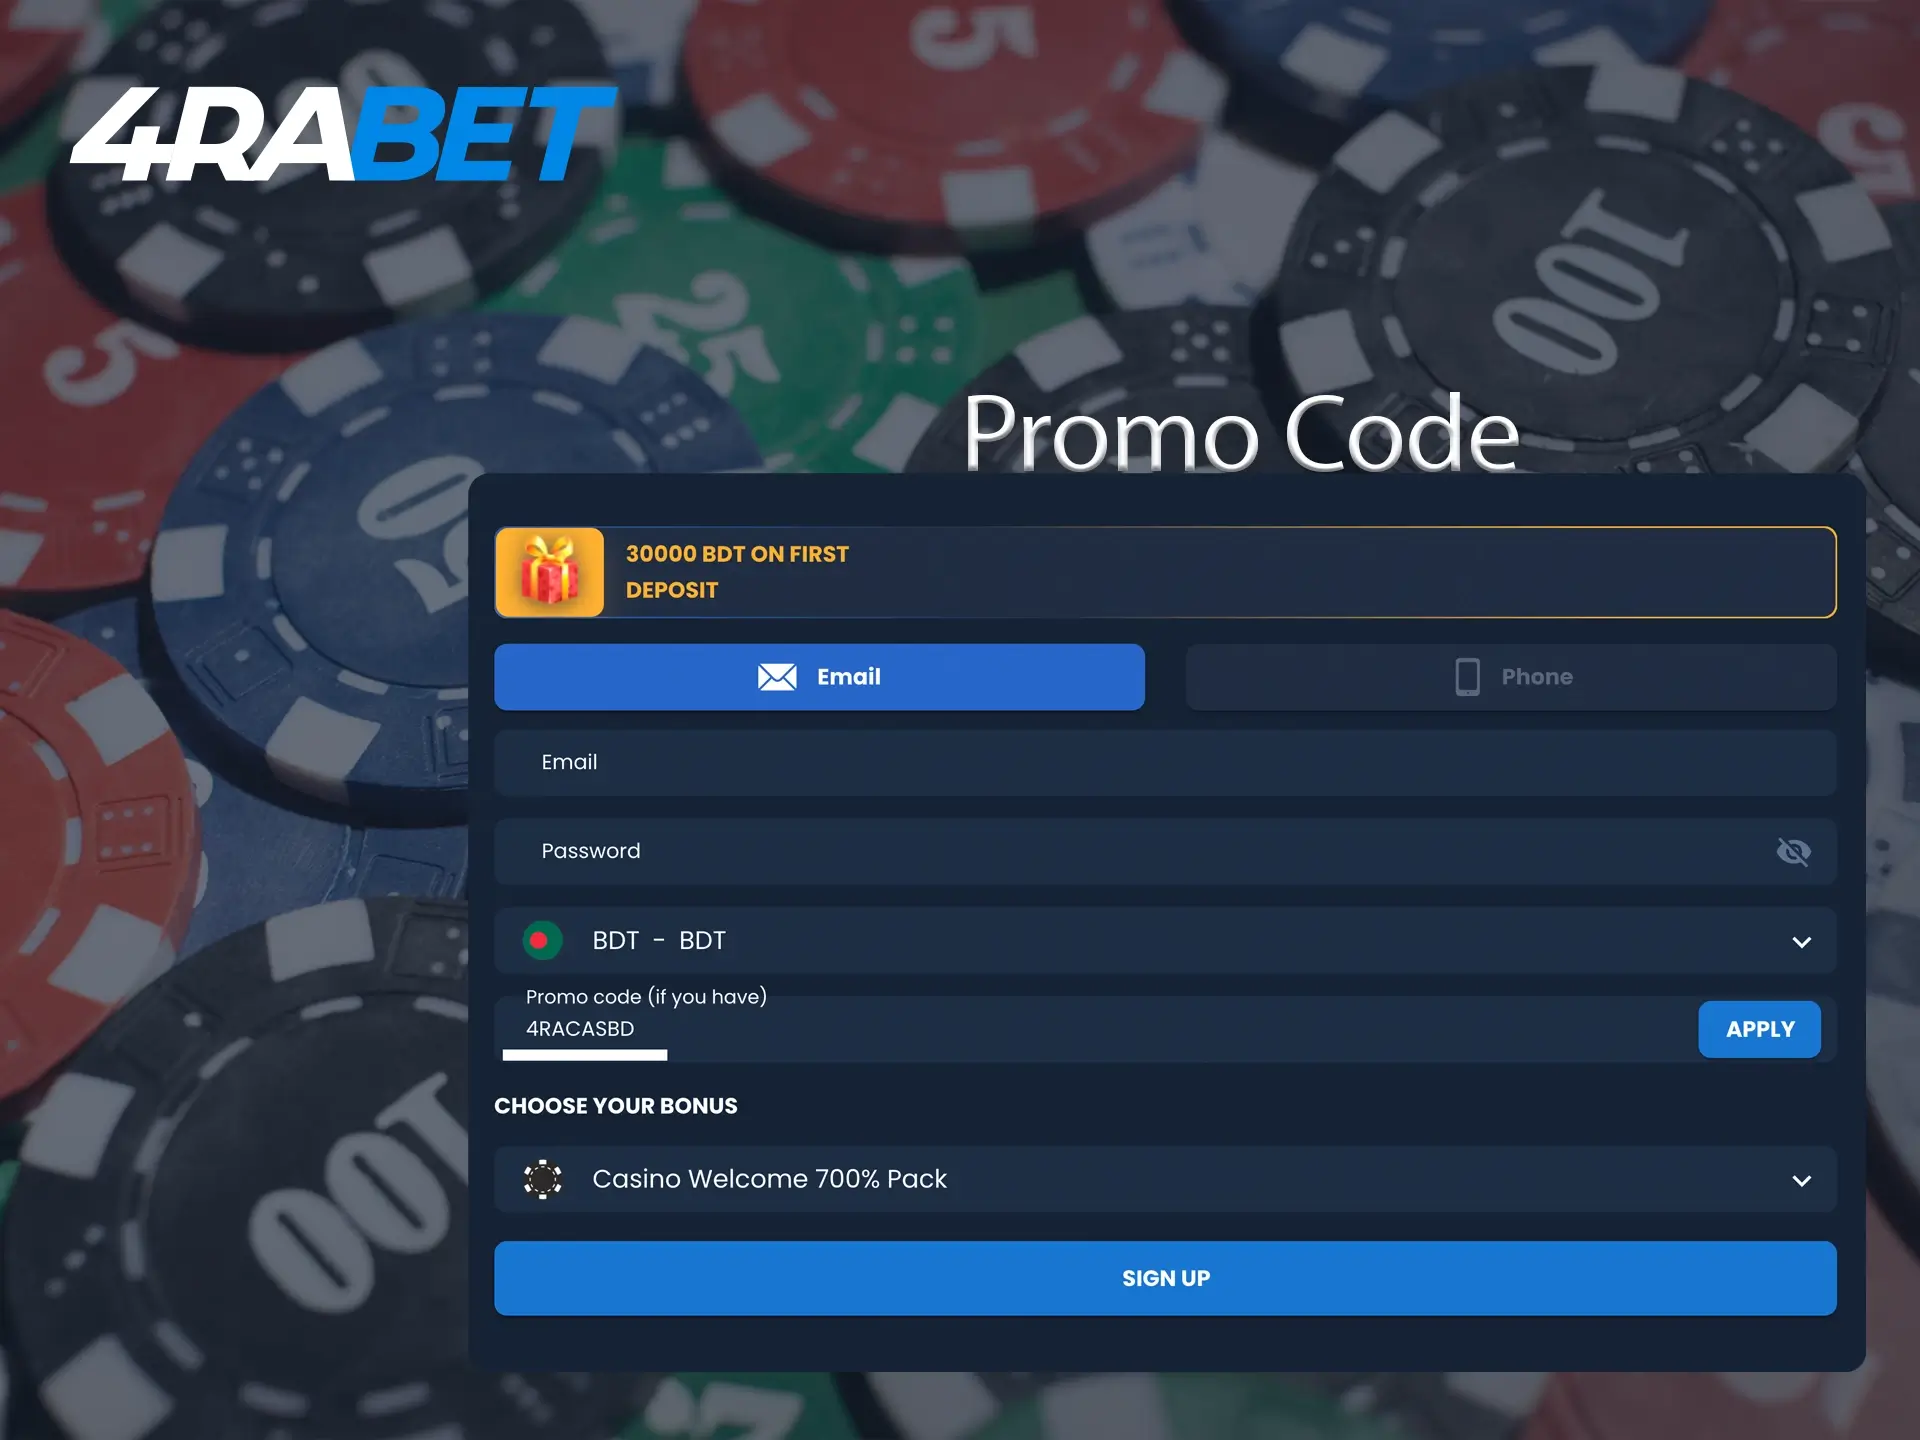 This promo code will help you gain confidence in your games and have a meaningful experience at 4rabet Casino.